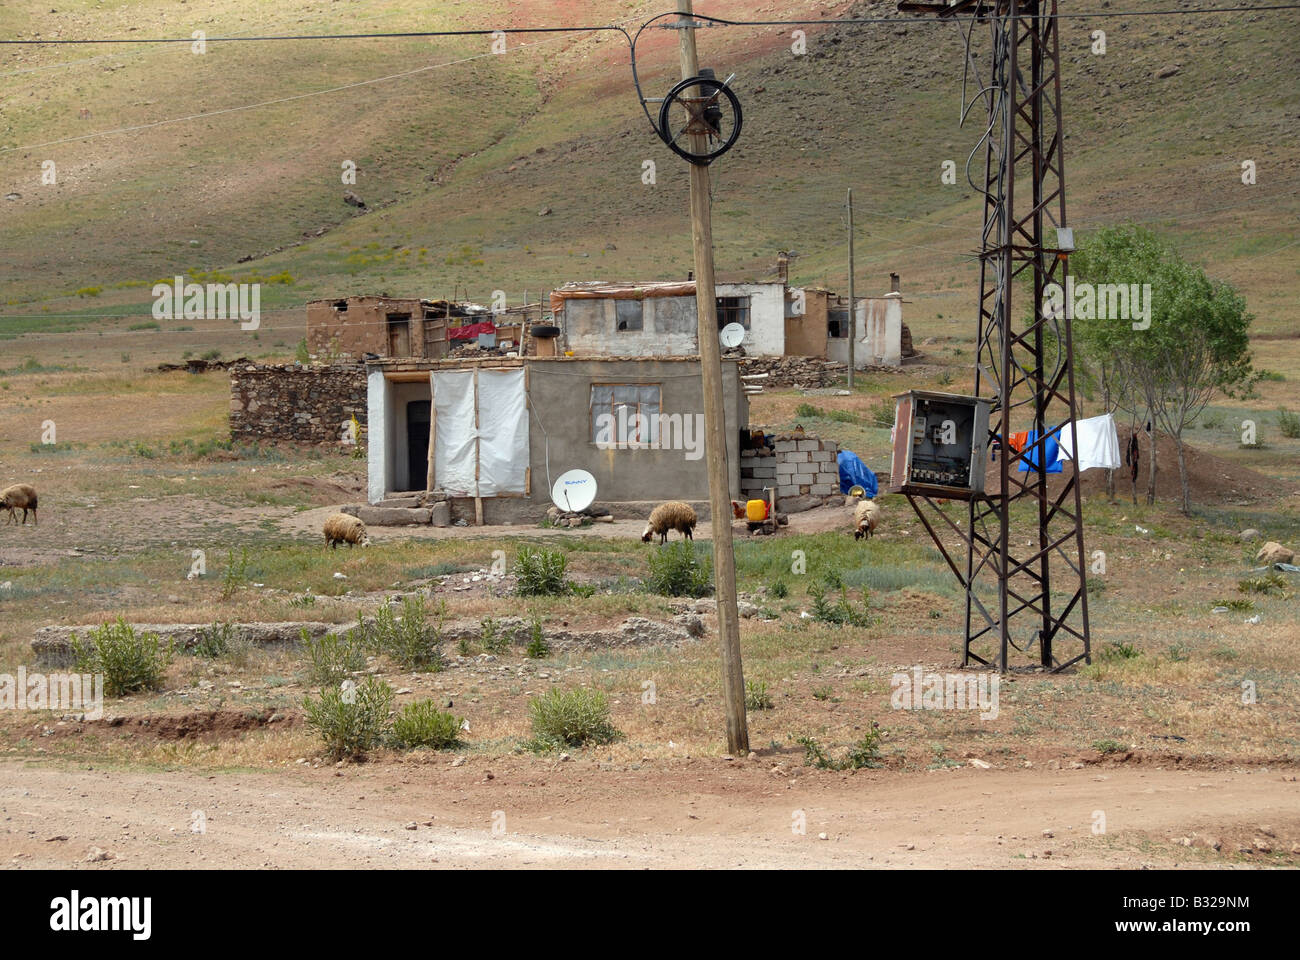 A Kurdish house in East Turkey. There is an open electricity cabinet in the foreground. Stock Photo